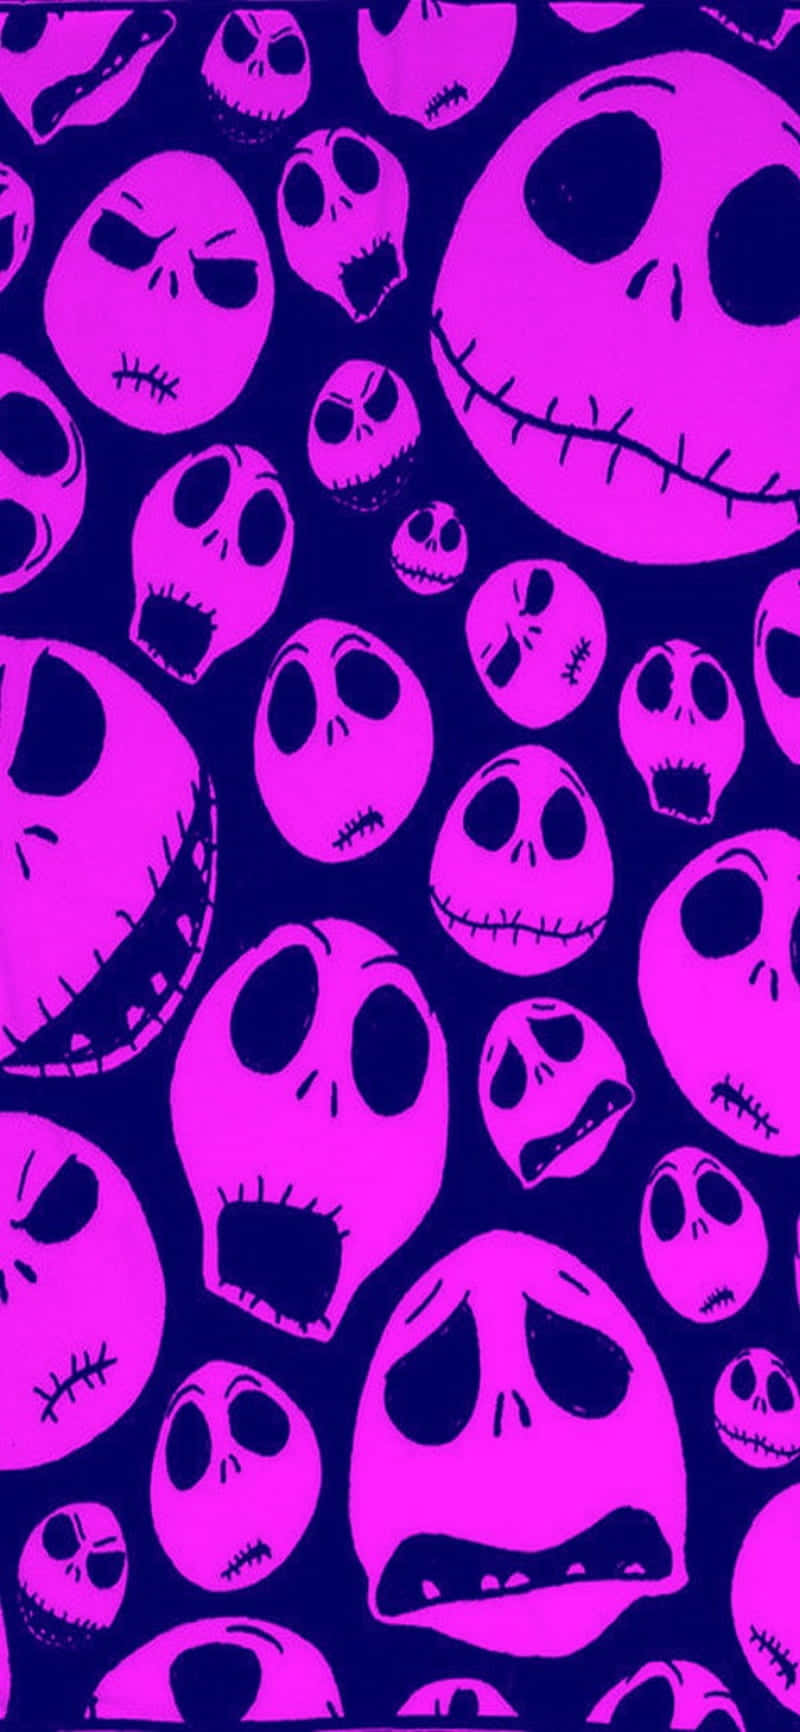 Jack Skellington and the spooky characters of The Nightmare Before Christmas make for a festive phone accessory. Wallpaper